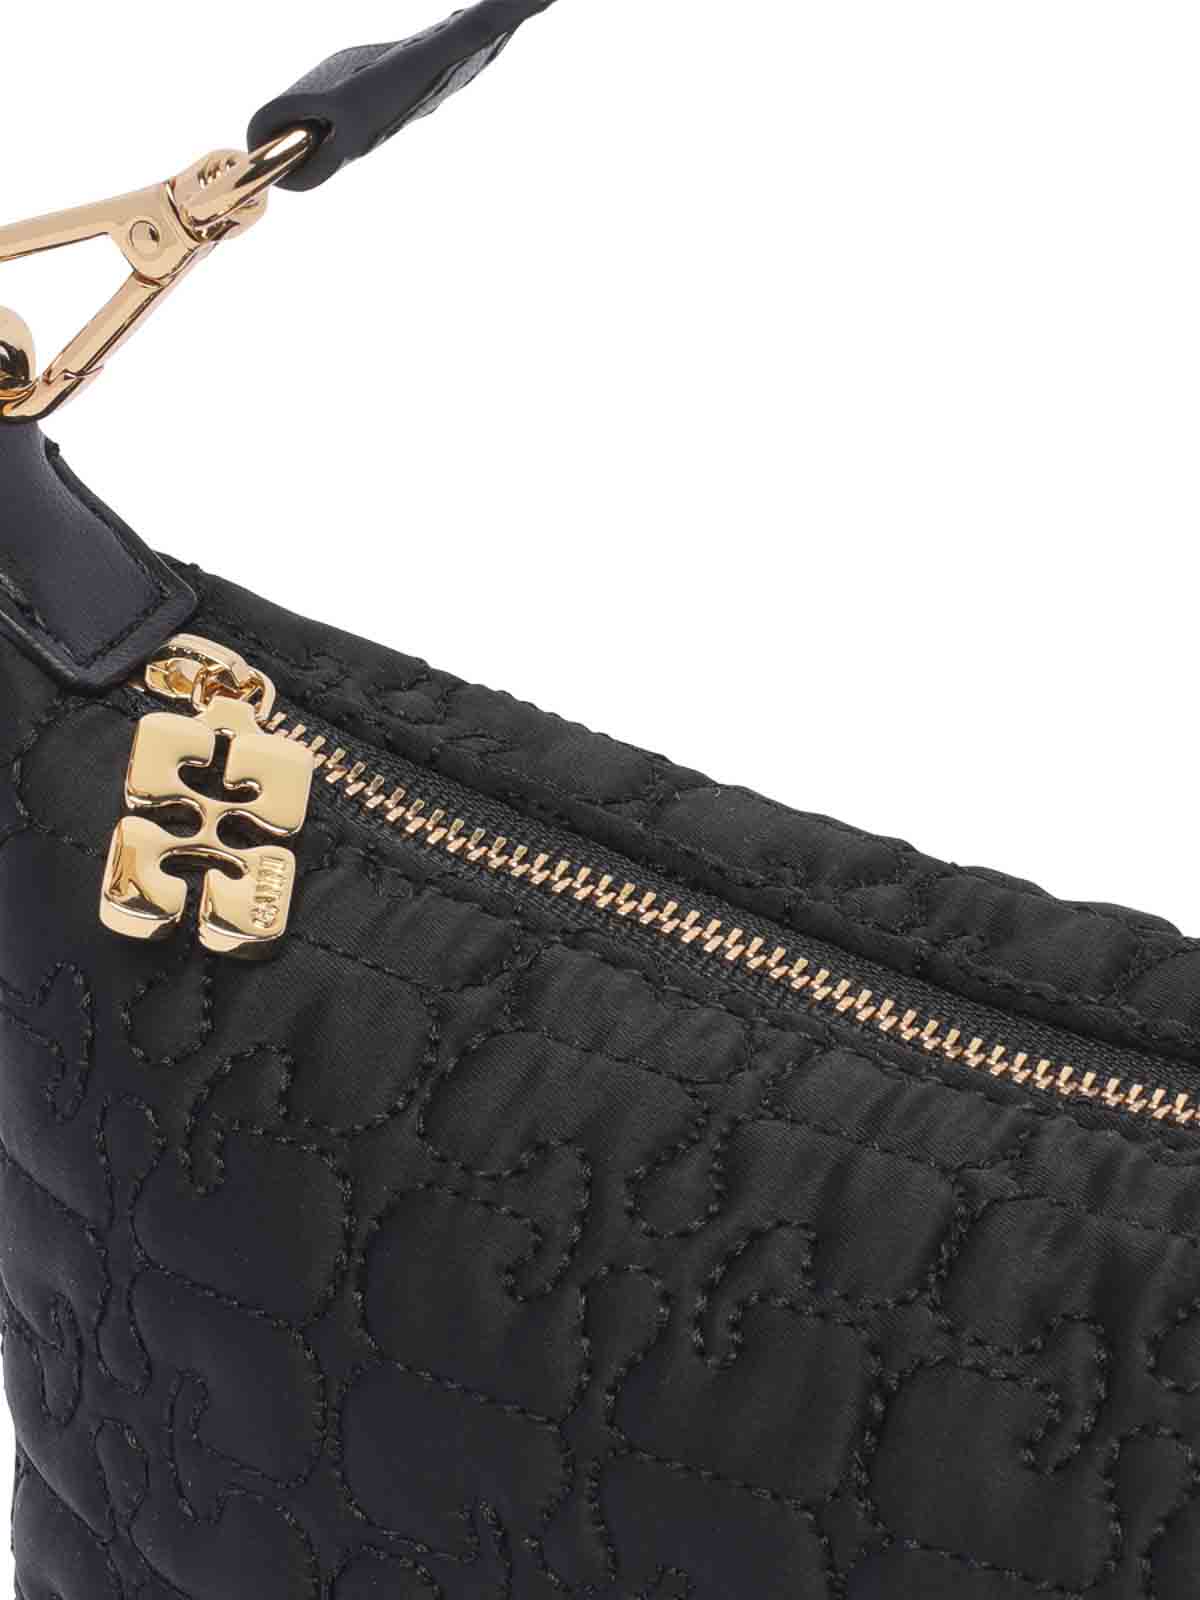 Shop Ganni Butterfly Small Hand Bag In Black